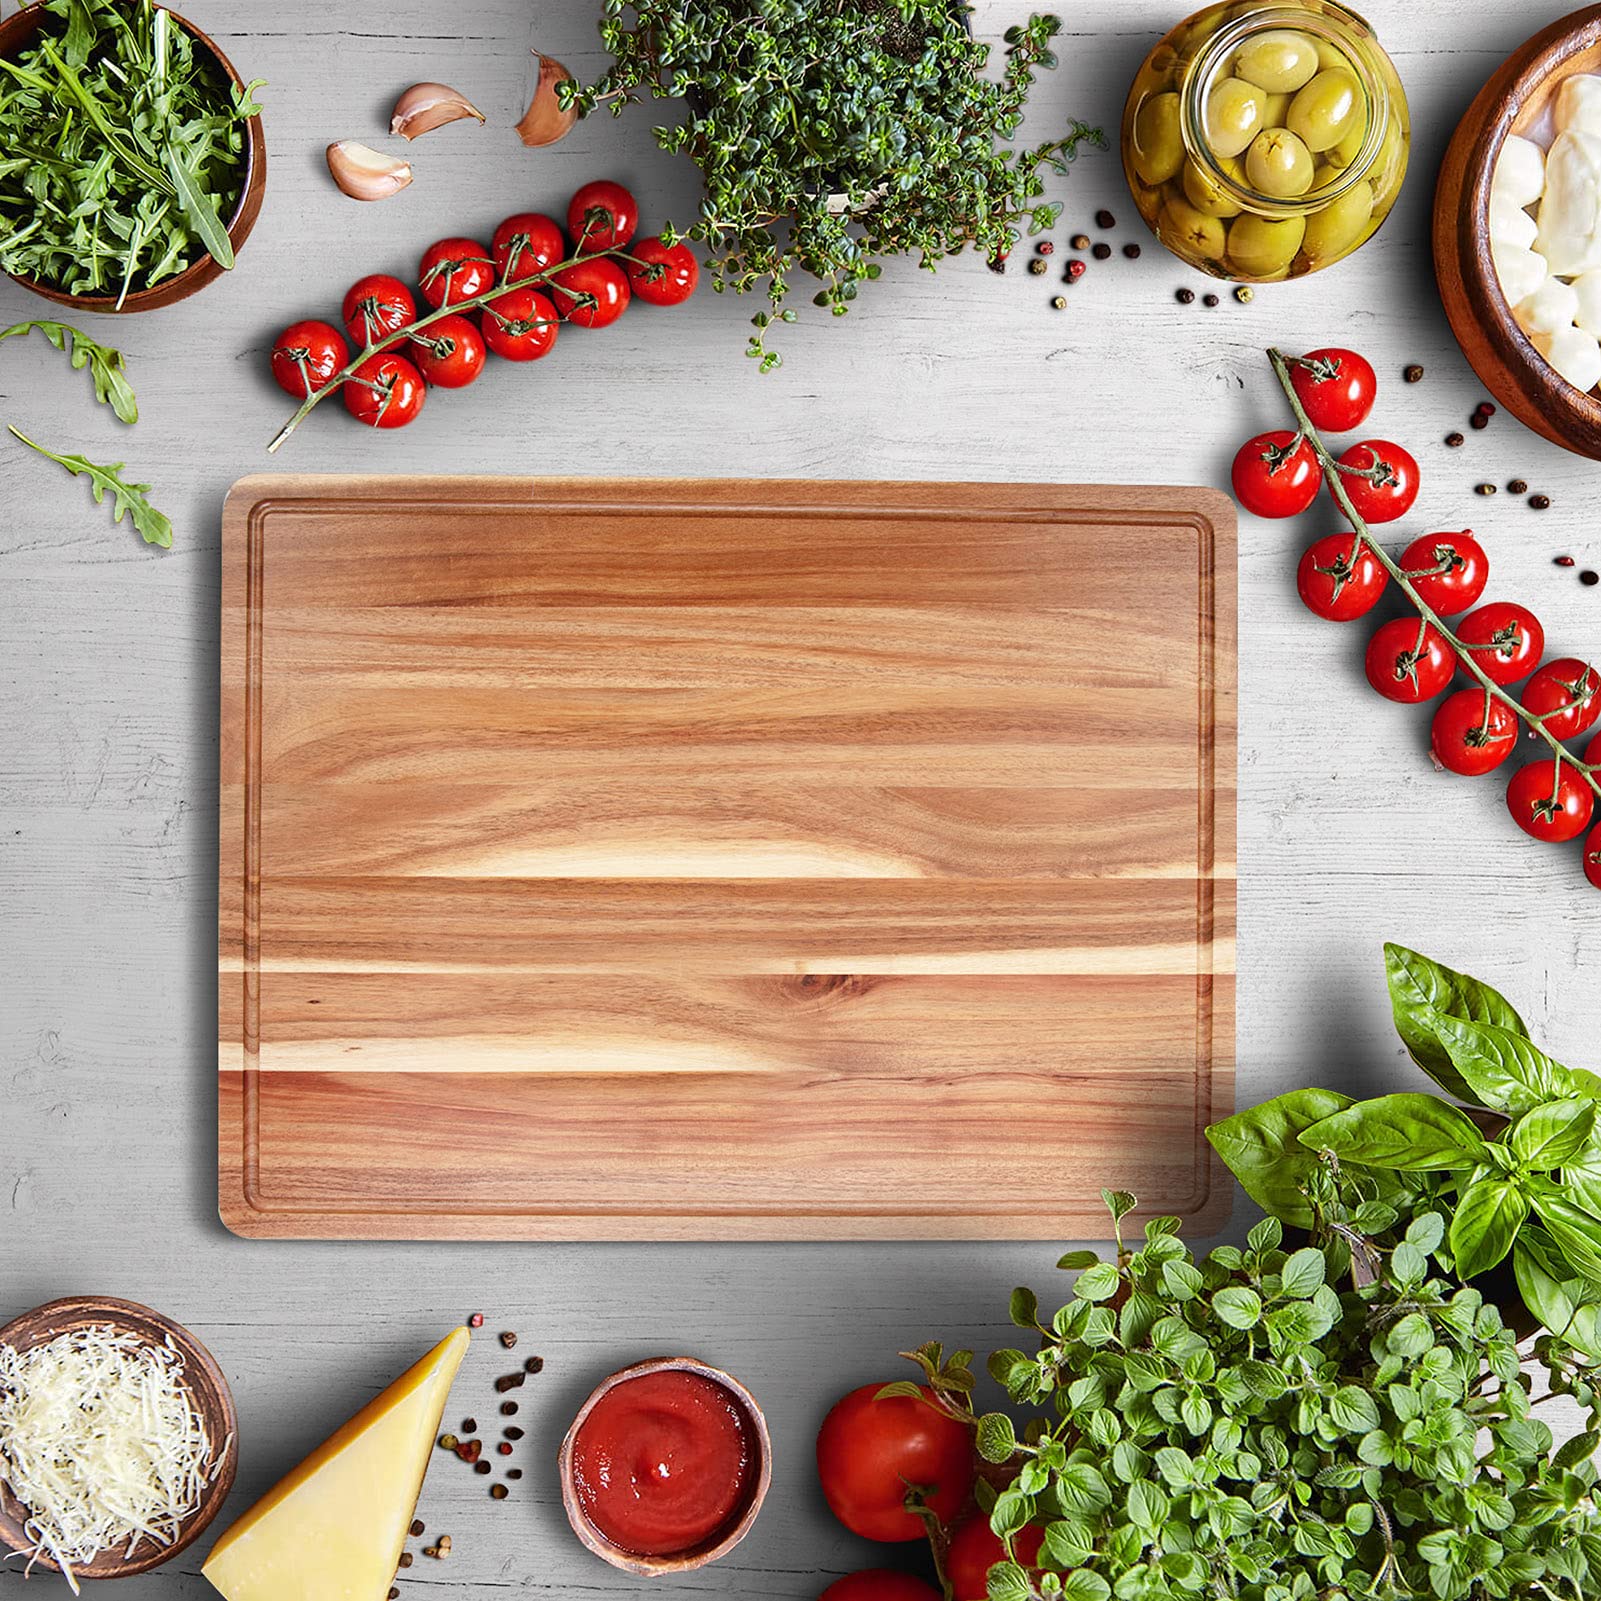 Large Acacia Wood Cutting Boards for Kitchen, 24 x 18 Inch Extra Large Wooden Cutting Board with Juice Groove, Reversible Butcher Block Cutting Board for Meat and Veggies